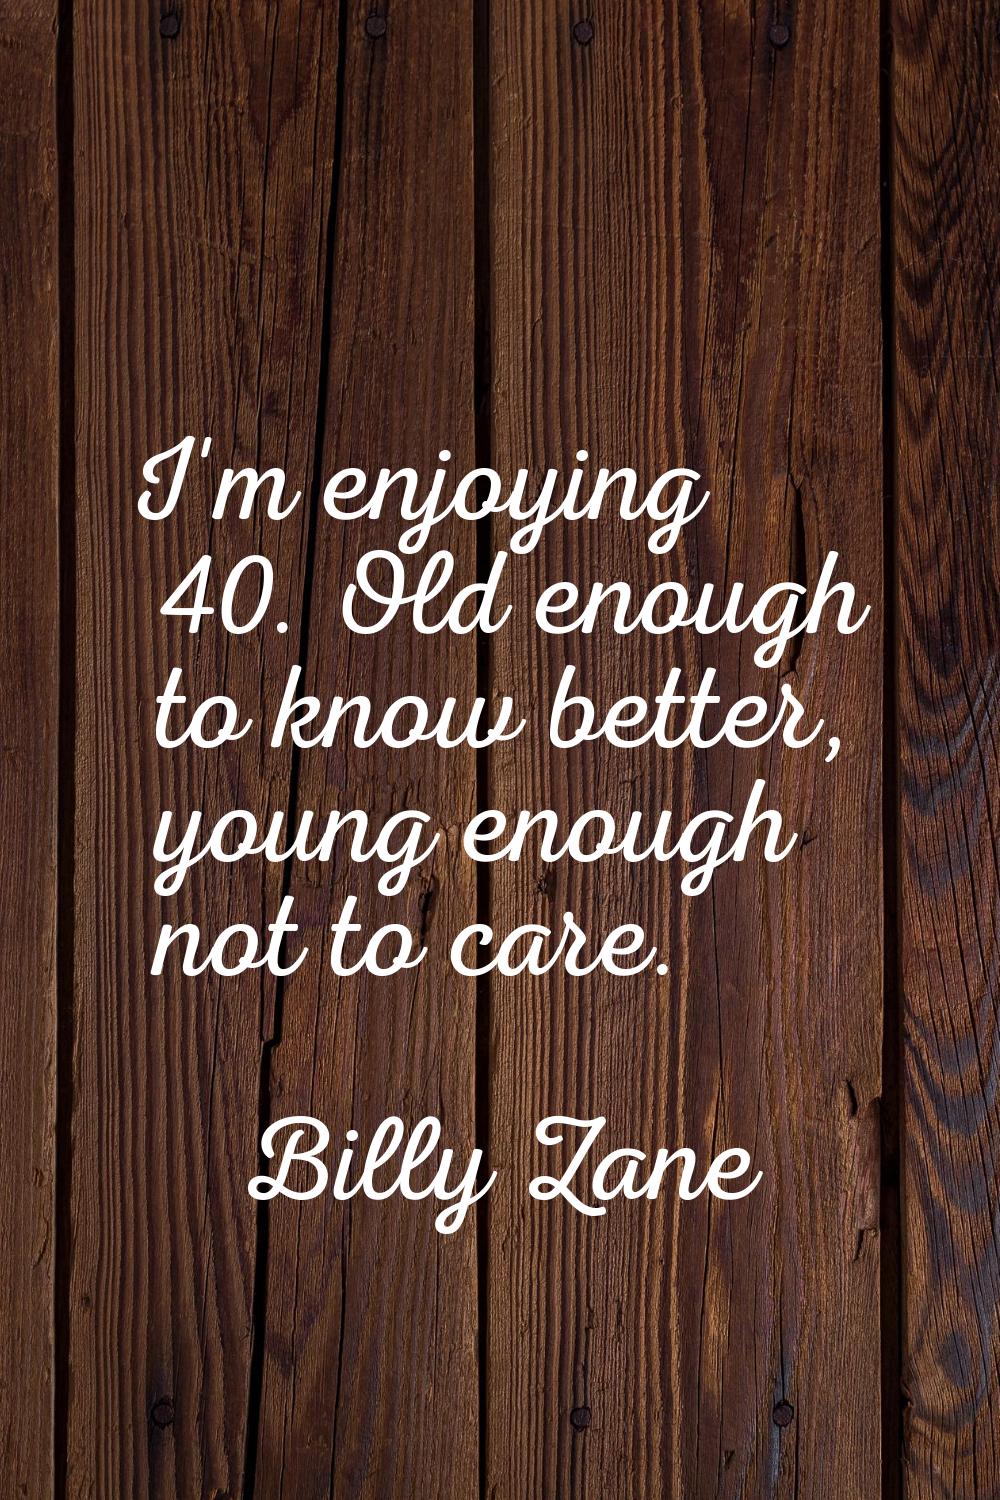 I'm enjoying 40. Old enough to know better, young enough not to care.